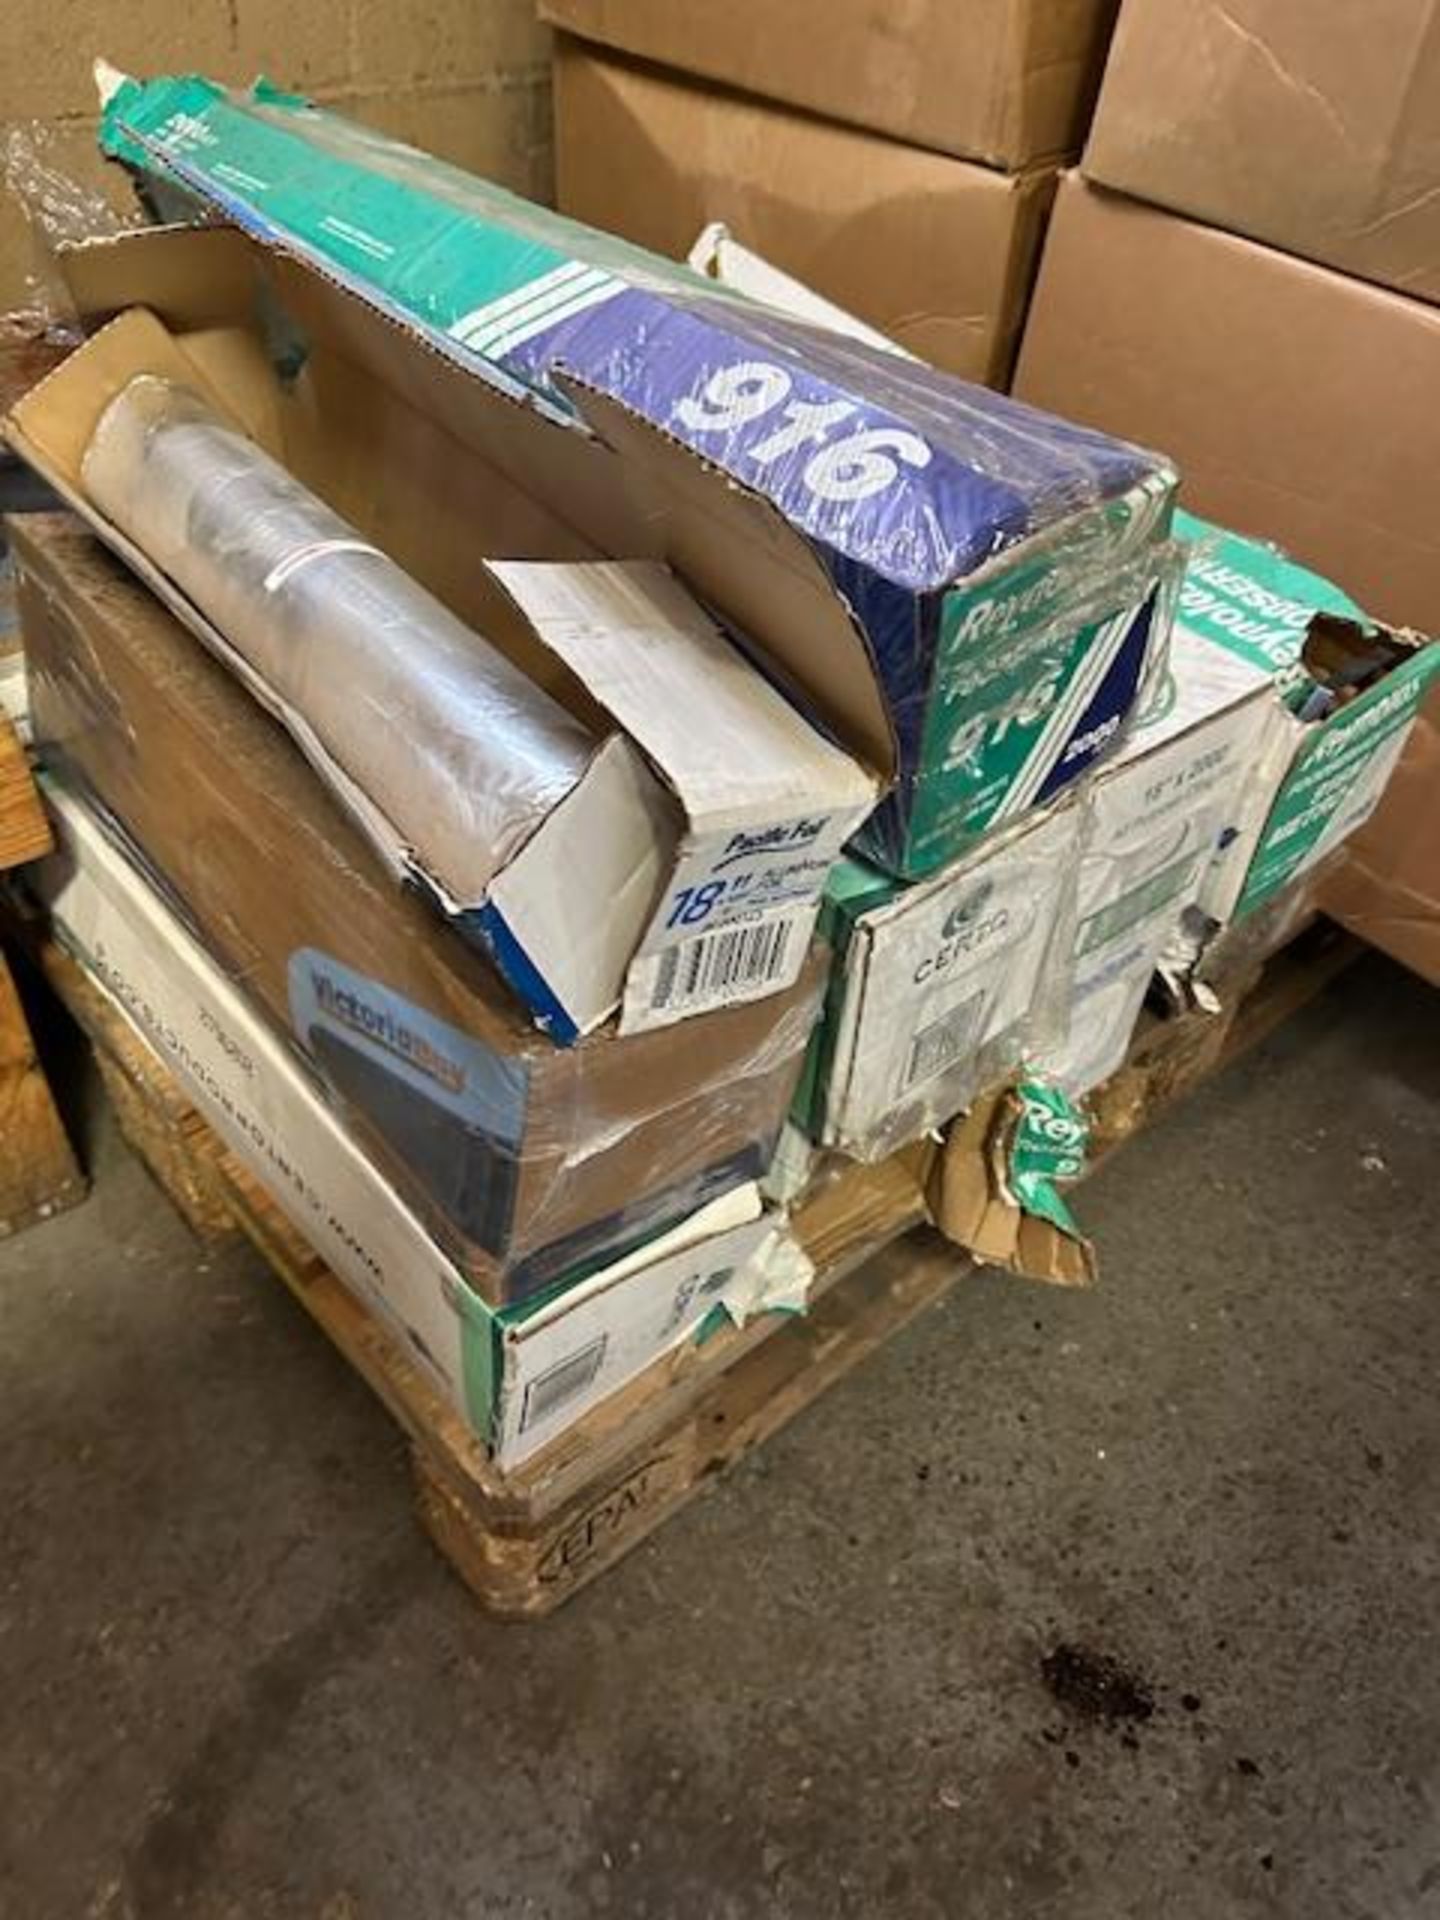 LOT - (2) Skids of Canned Fuel, Polybags, Cutlery Kits, Foil and Film - Image 4 of 4